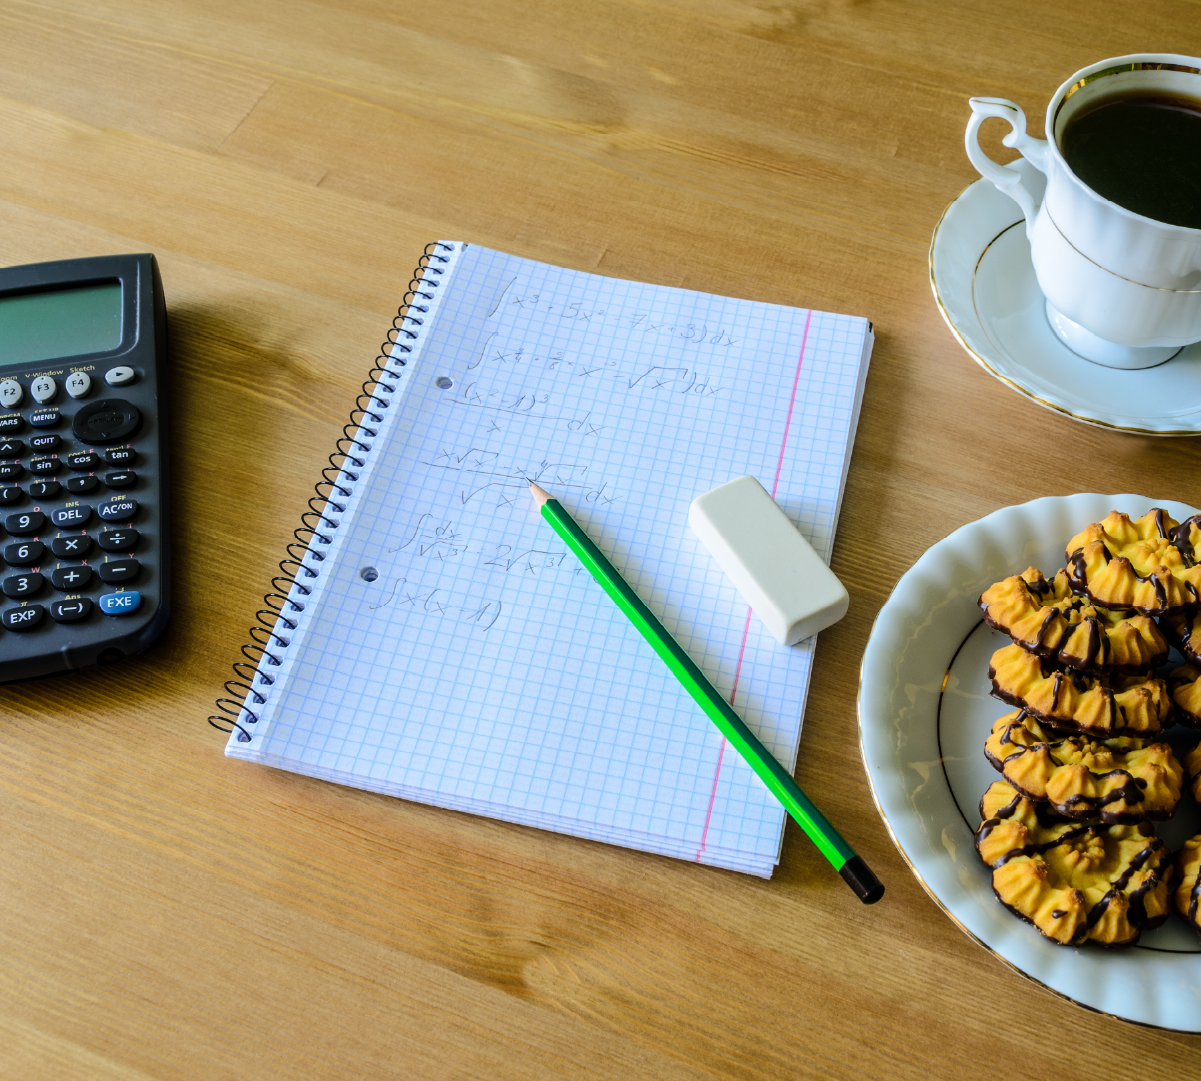 Decorative image: The Pareto principle: Calculator, notebook and coffee on a table.